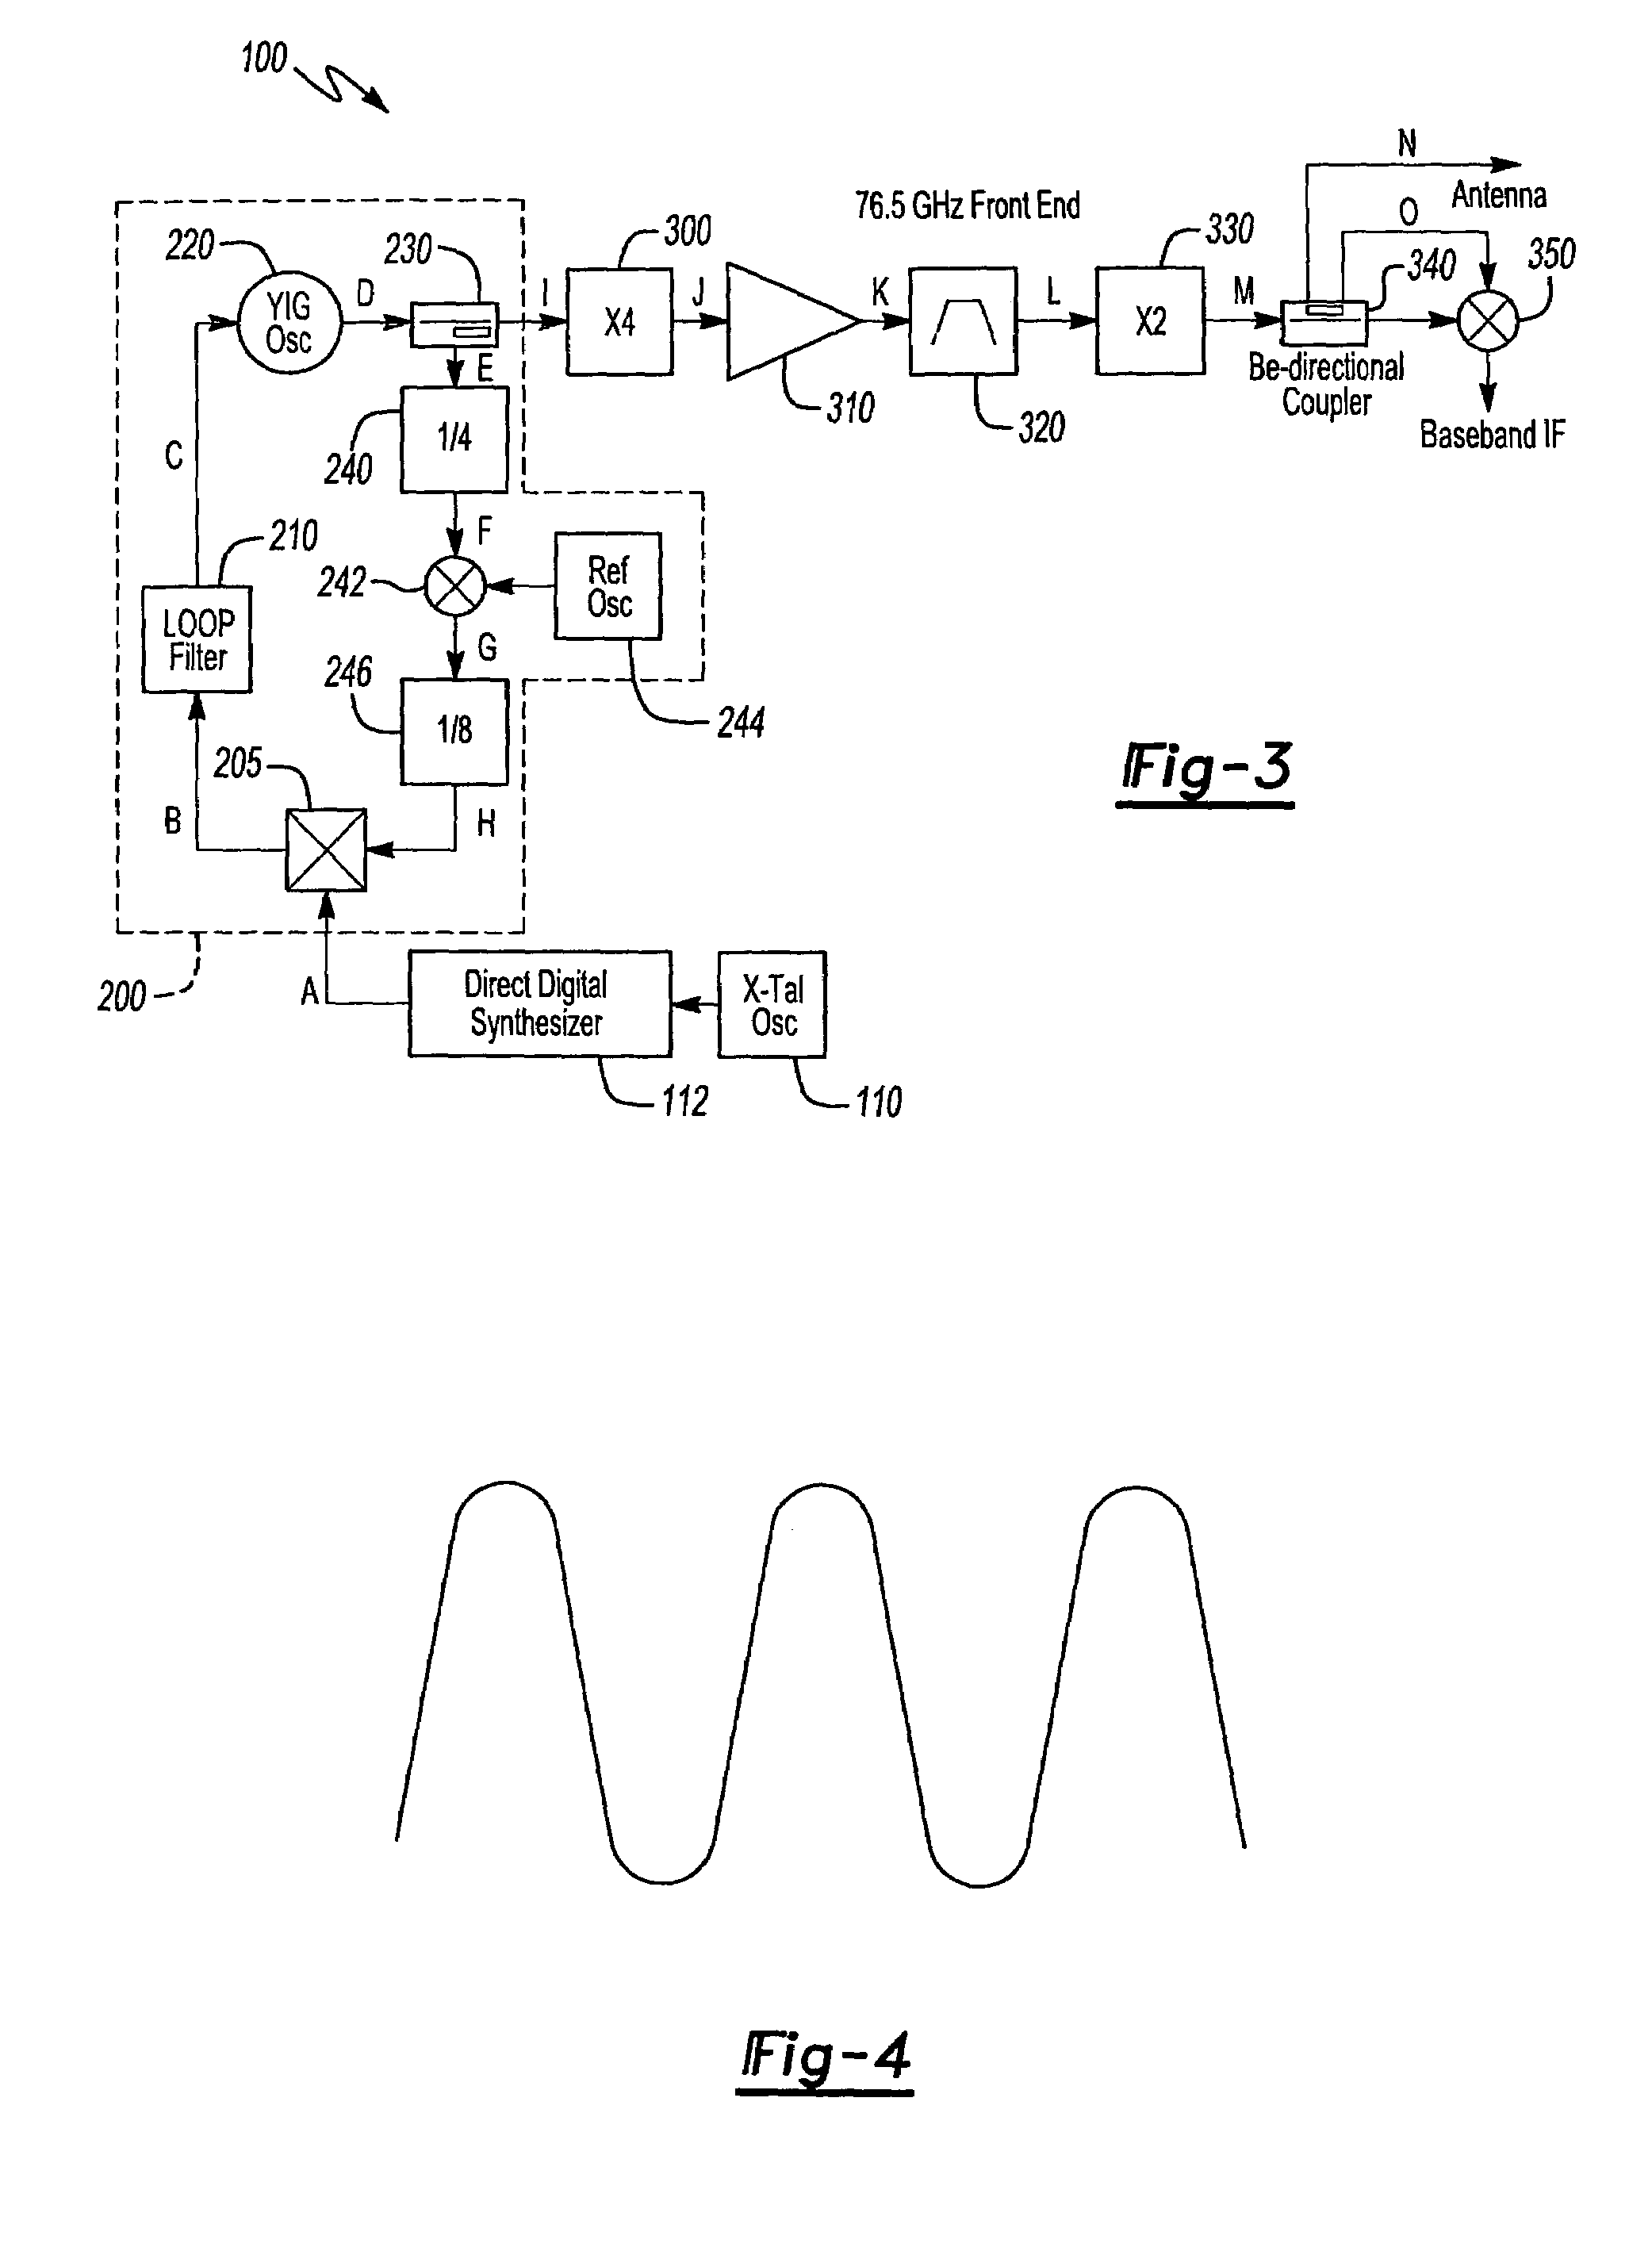 Radio frequency transceiver